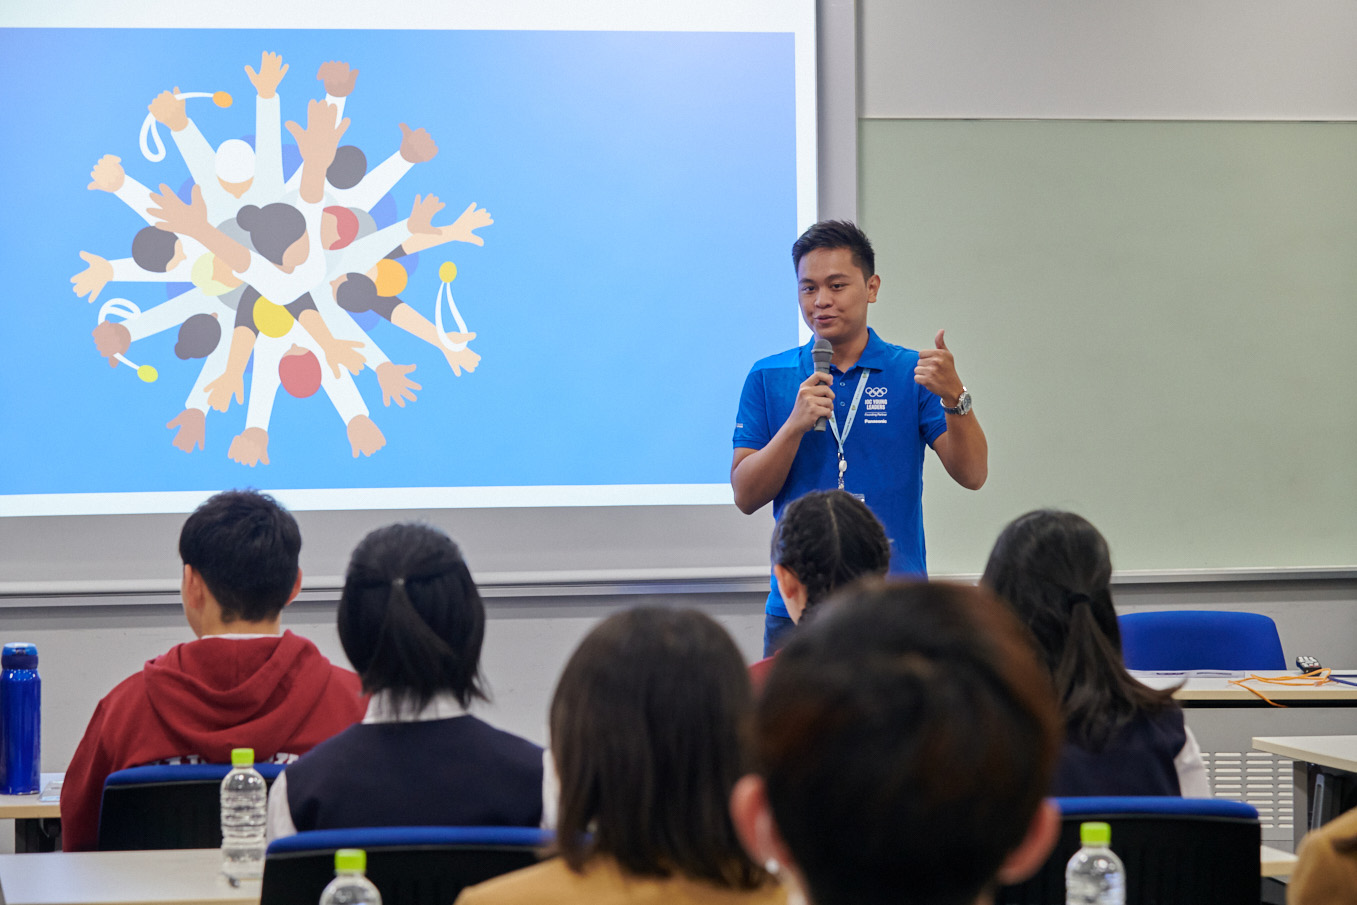 Photo: Alfonso introduces the IOC Young Leaders Programme at a school in Japan 